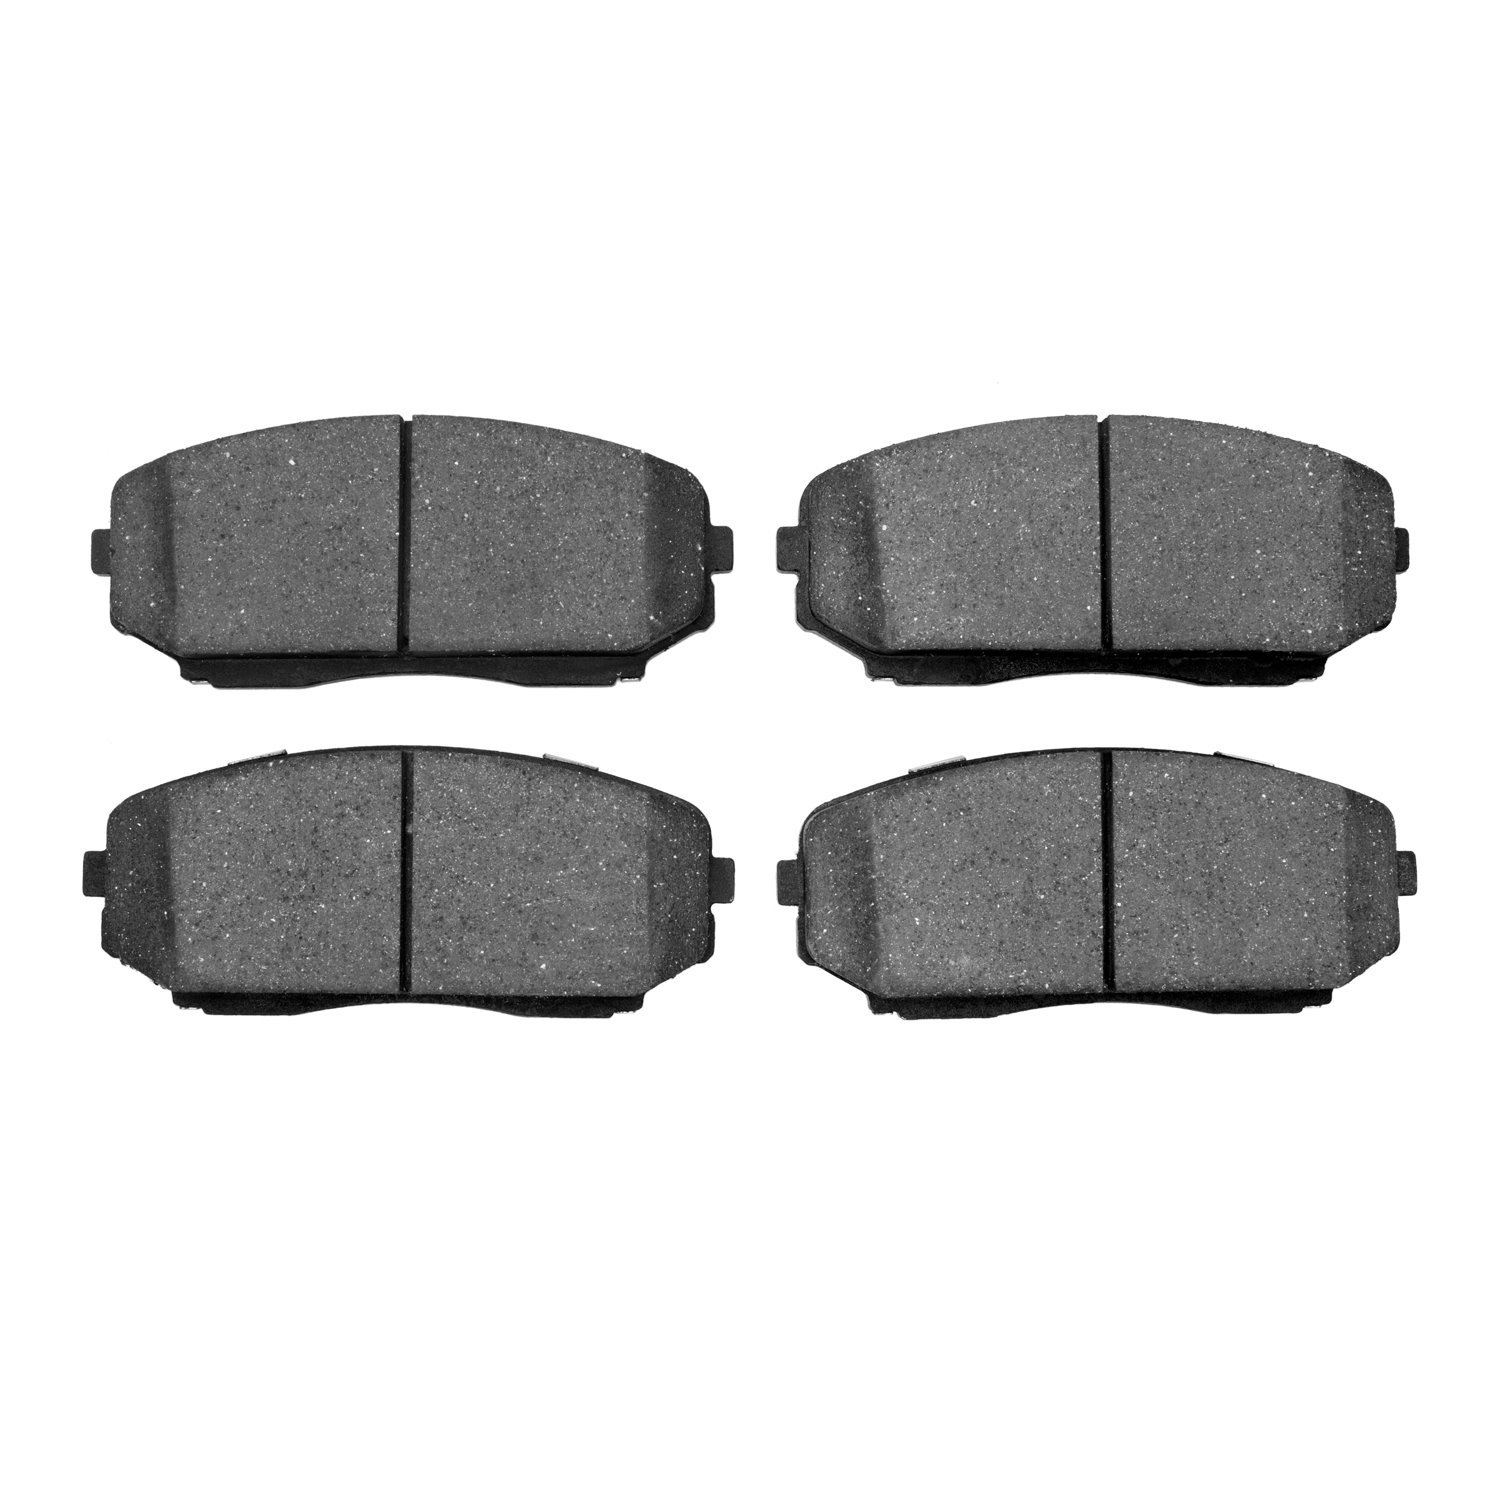 1552-1258-00 5000 Advanced Ceramic Brake Pads, Fits Select Ford/Lincoln/Mercury/Mazda, Position: Front